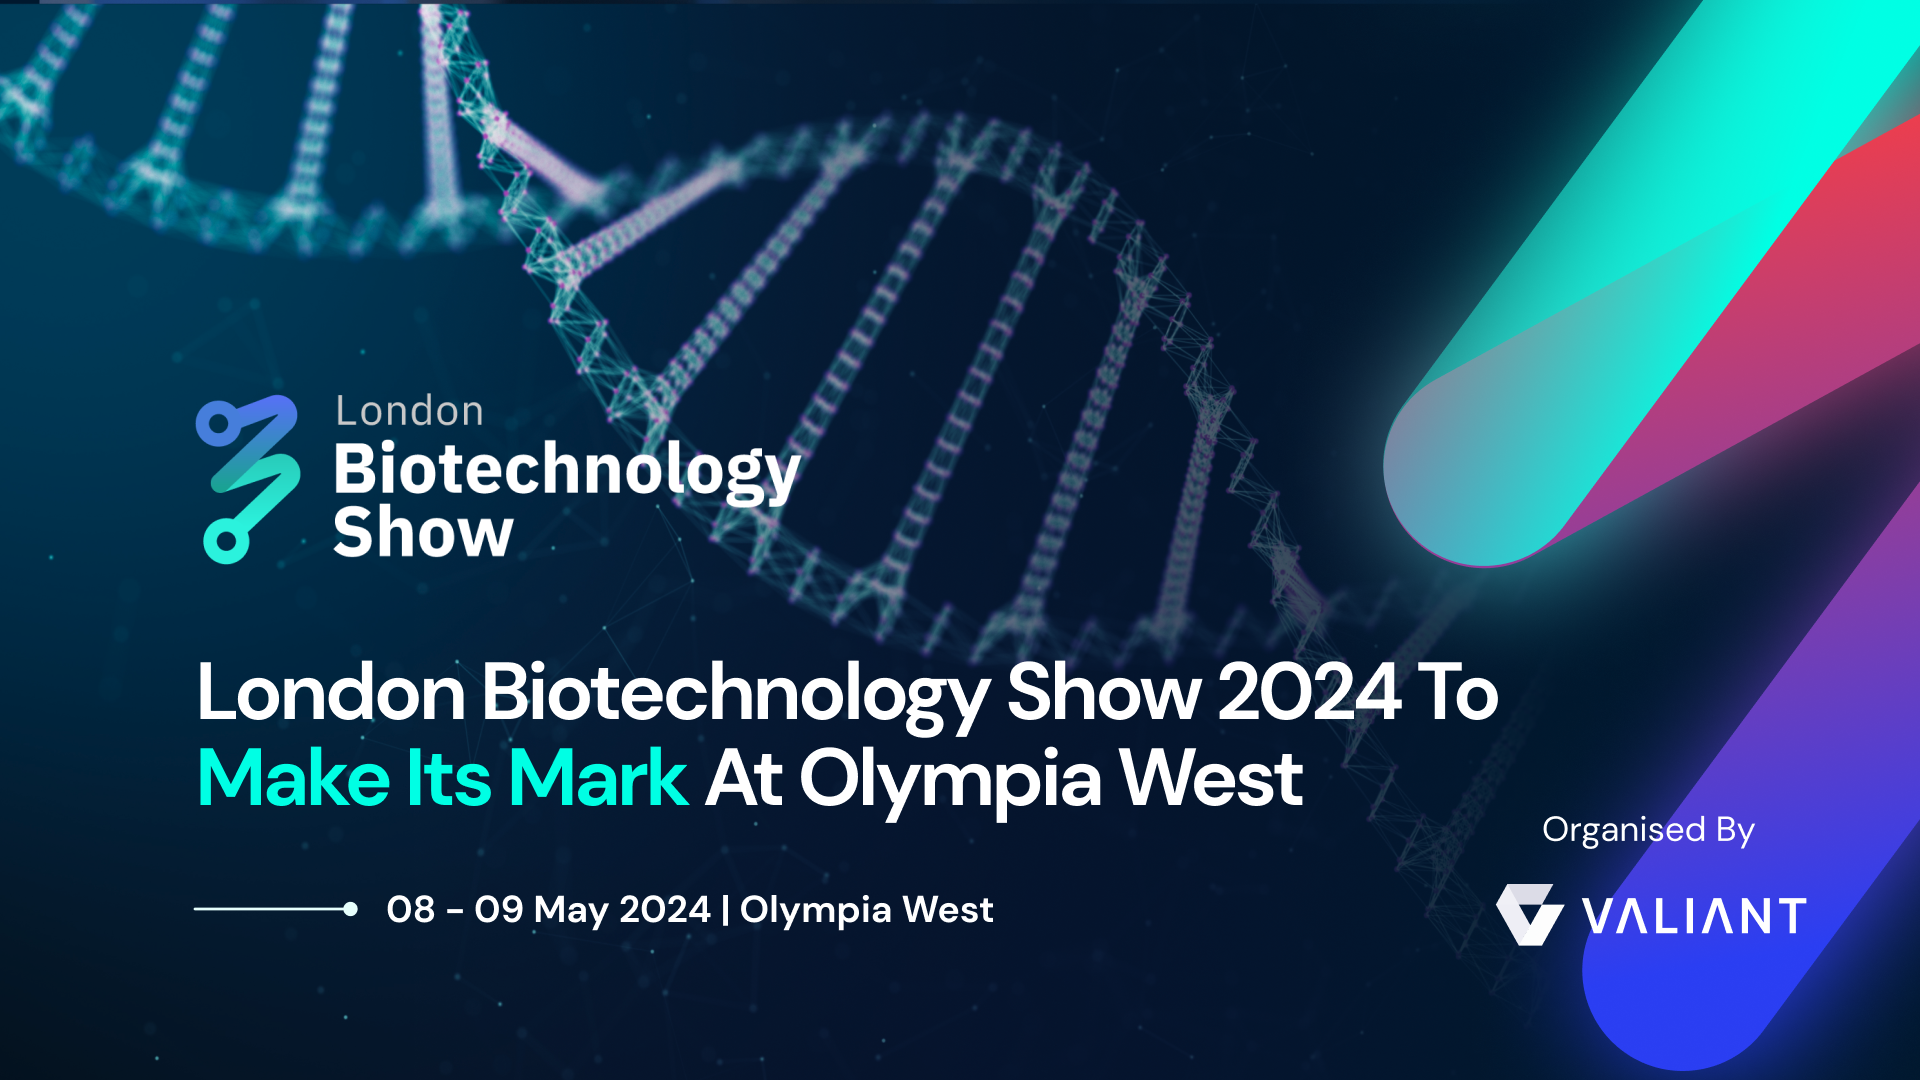 London Biotechnology Show 2024 To Make Its Mark At Olympia West